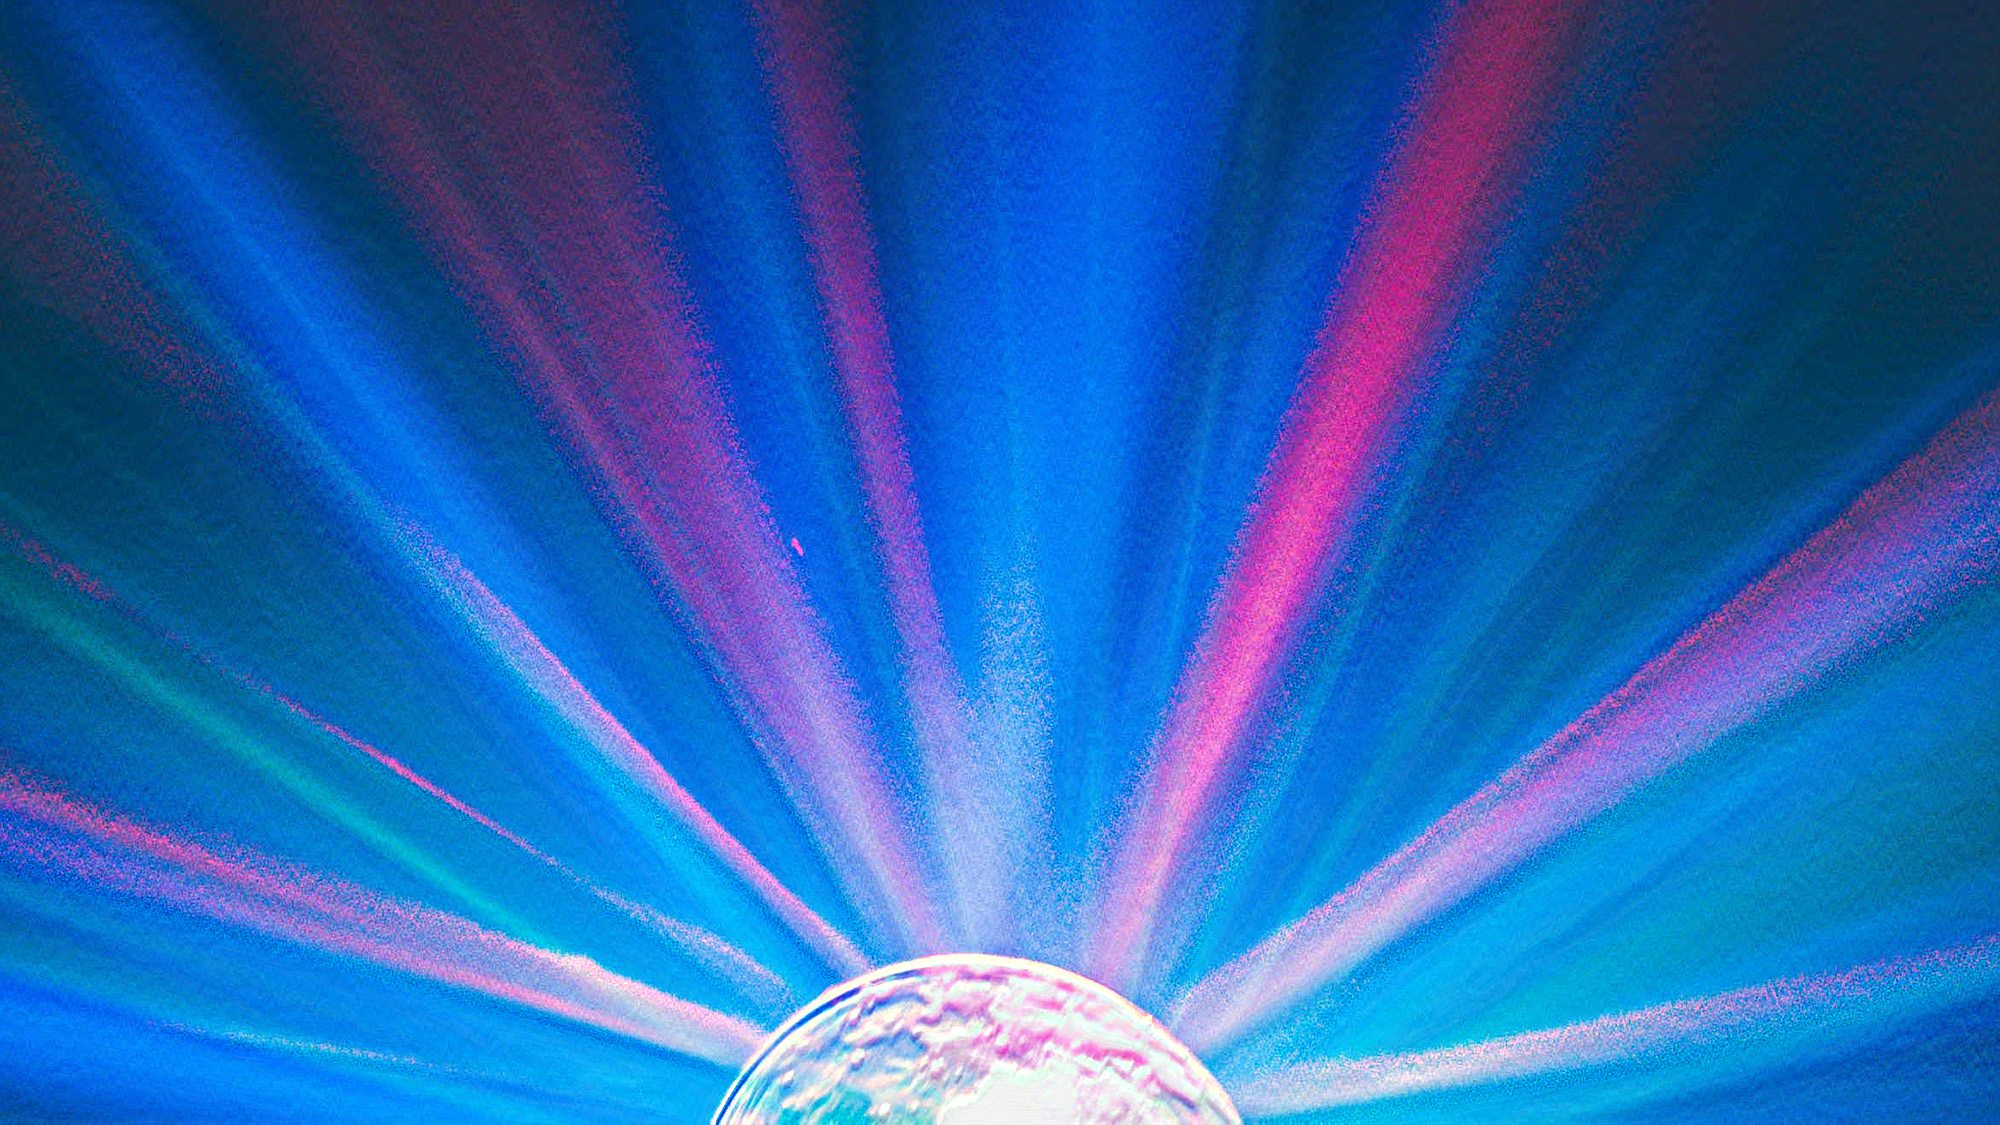 artistic rendering of pink and blue light rays spreading out from a round light source